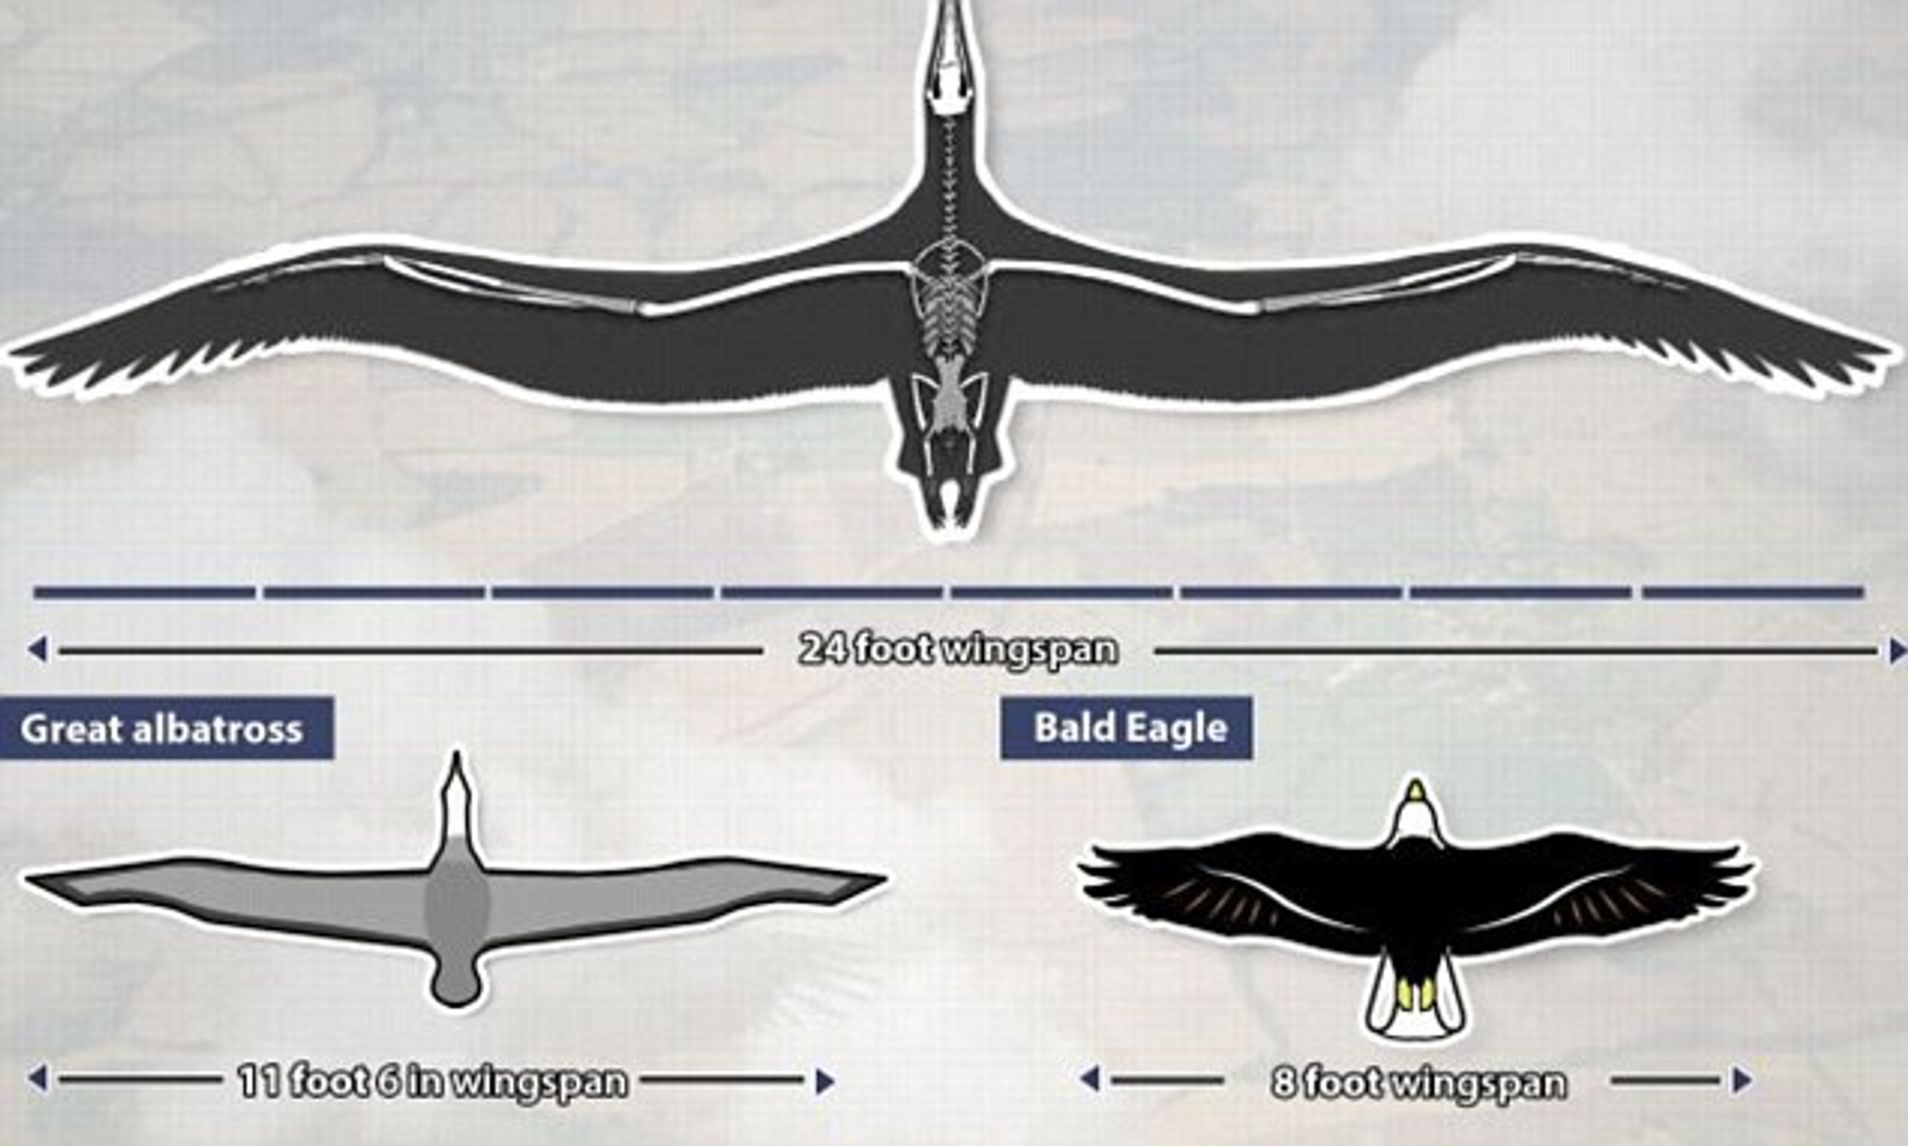 Birds with the largest wingspan include the Albatross